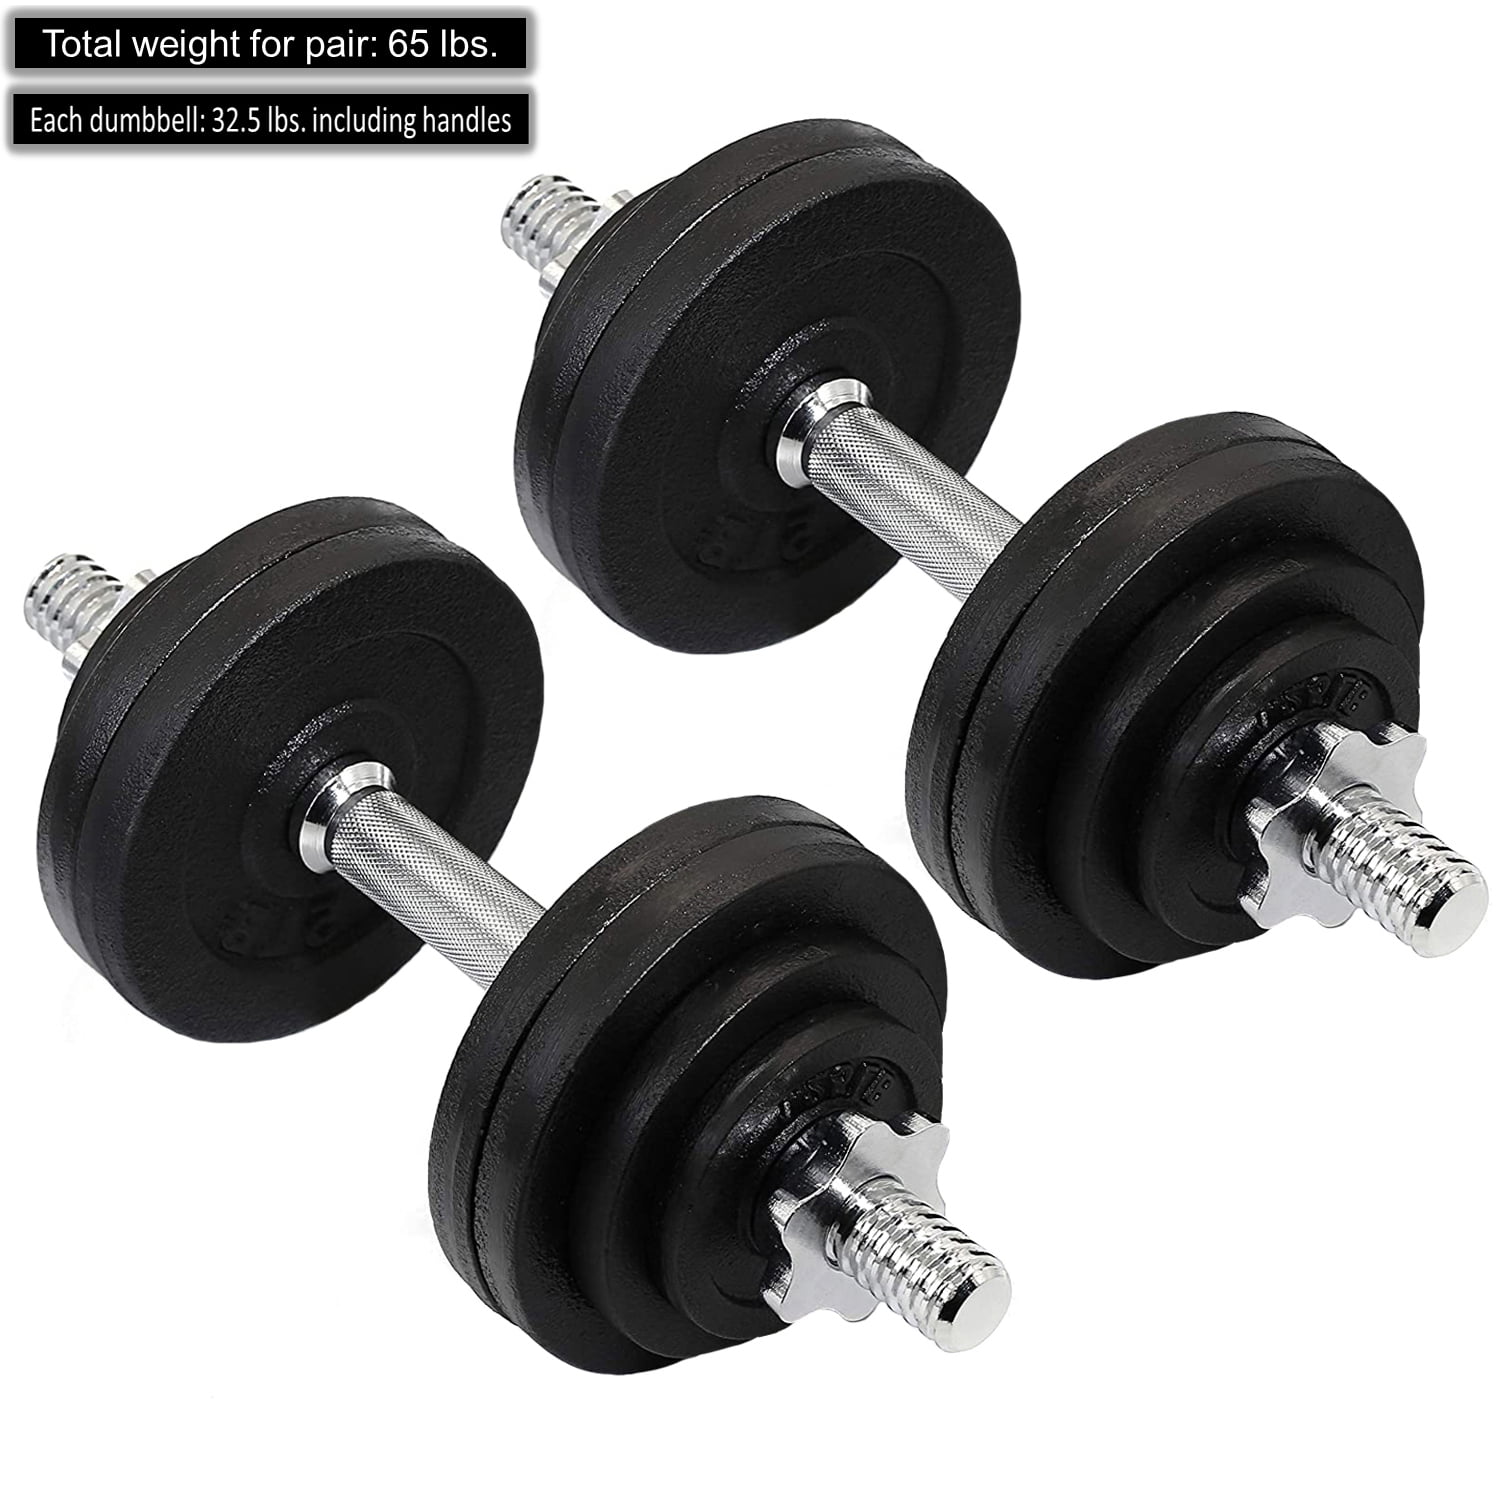 CAP Neoprene Hex Dumbells weights SET of 2 lb. and 3 lb. pairs FREE PRIORITY! 